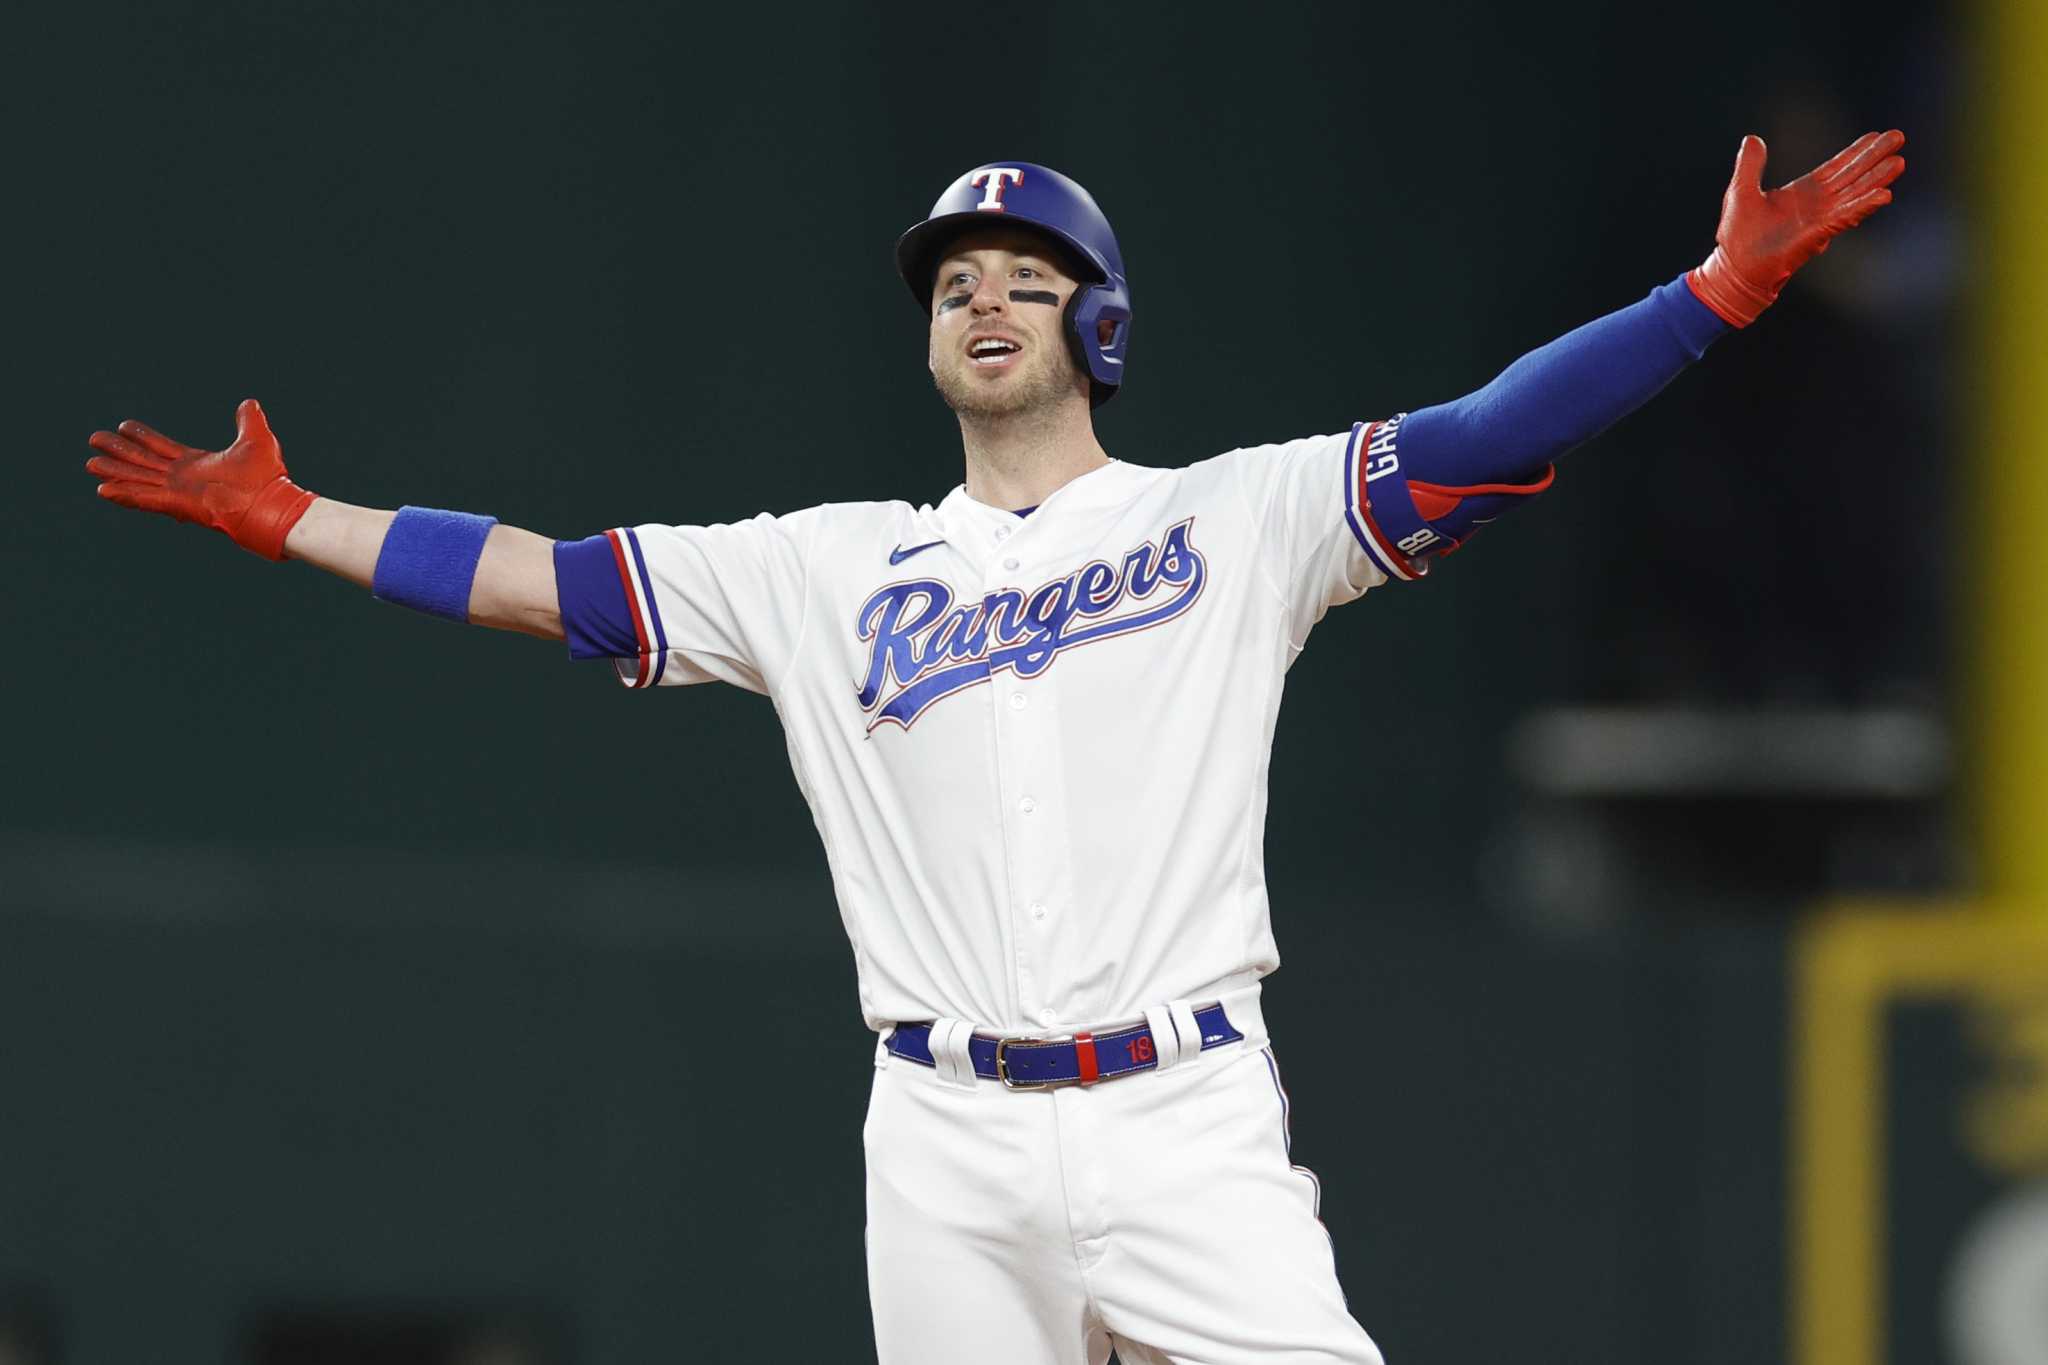 ALCS: After wild past month, Rangers ride high into series vs. Astros